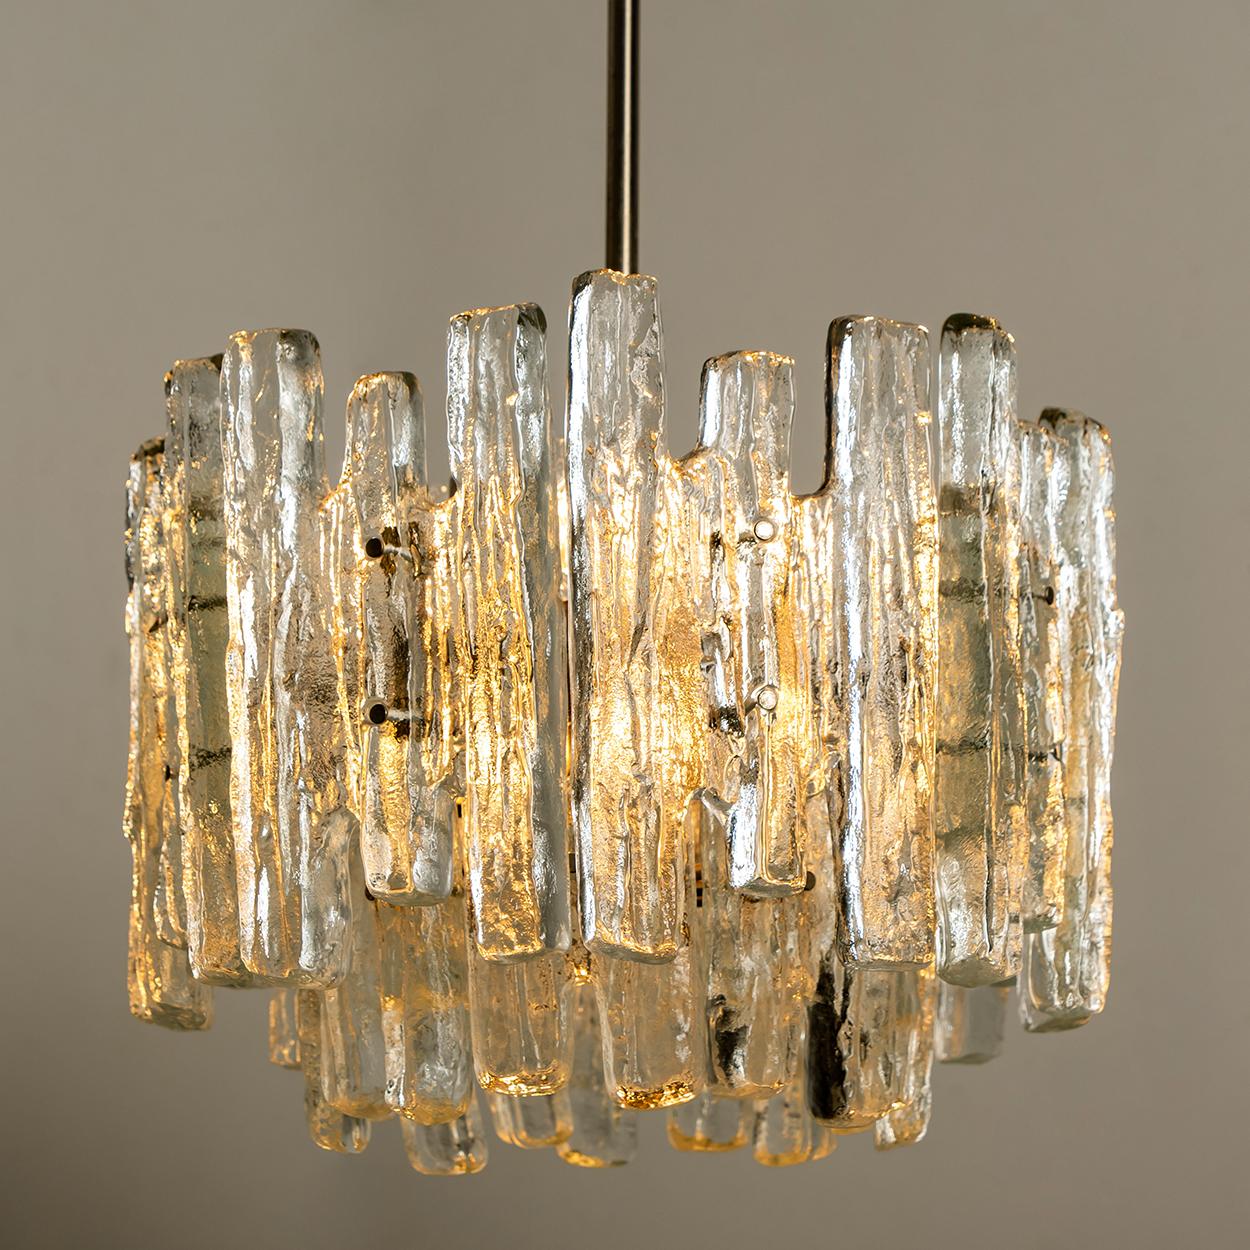 This modern chrome brushed chandeliers, manufactured by Kalmar Austria in the 1970s, have eight E27 sockets and three layers of 18 textured solid ice glass sheets dangling from it. This unique chandeliers are not only functioning as light source but